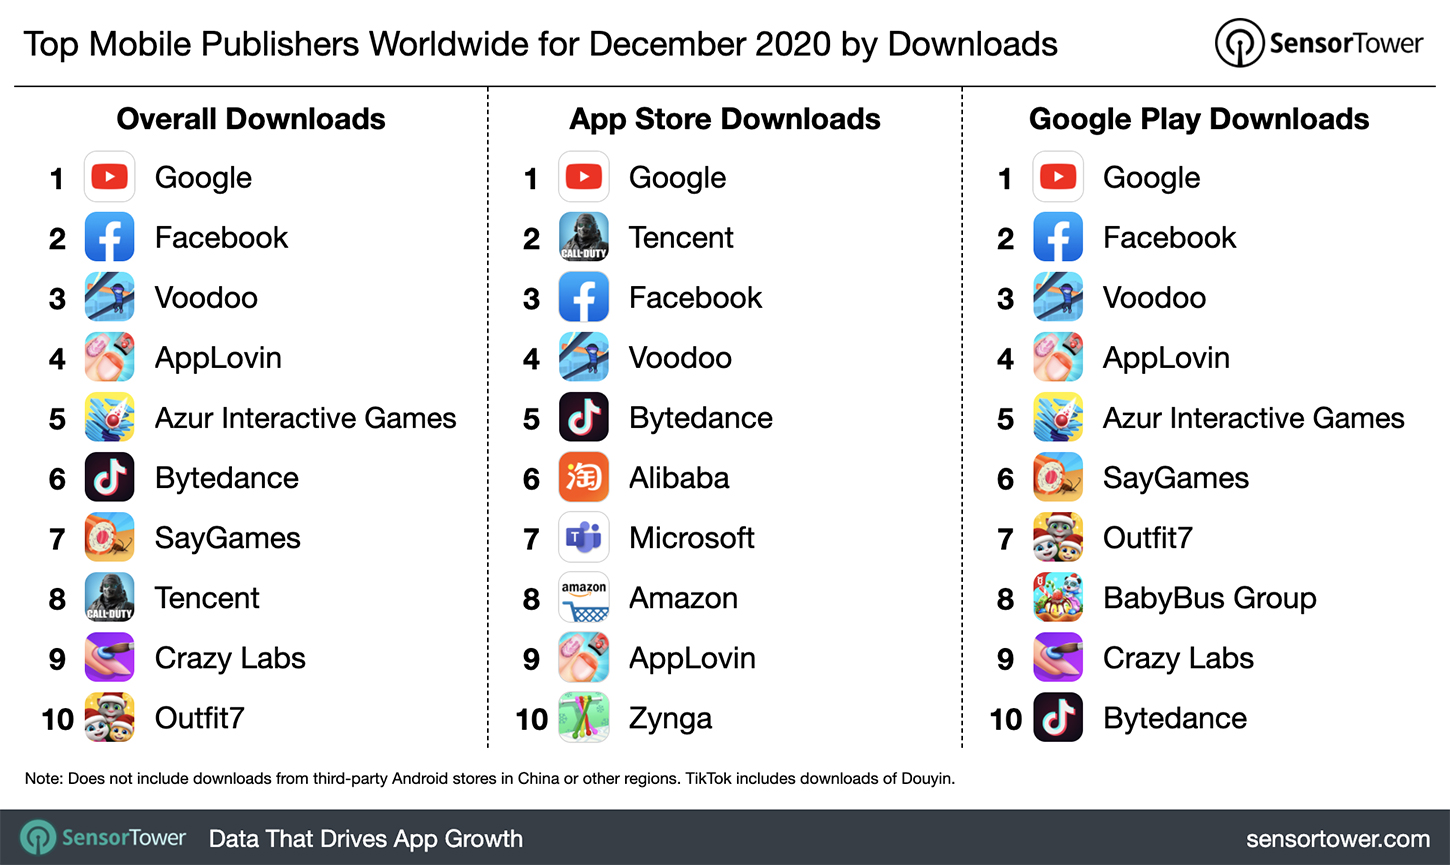 Top Mobile Publishers Worldwide for December 2020 by Downloads